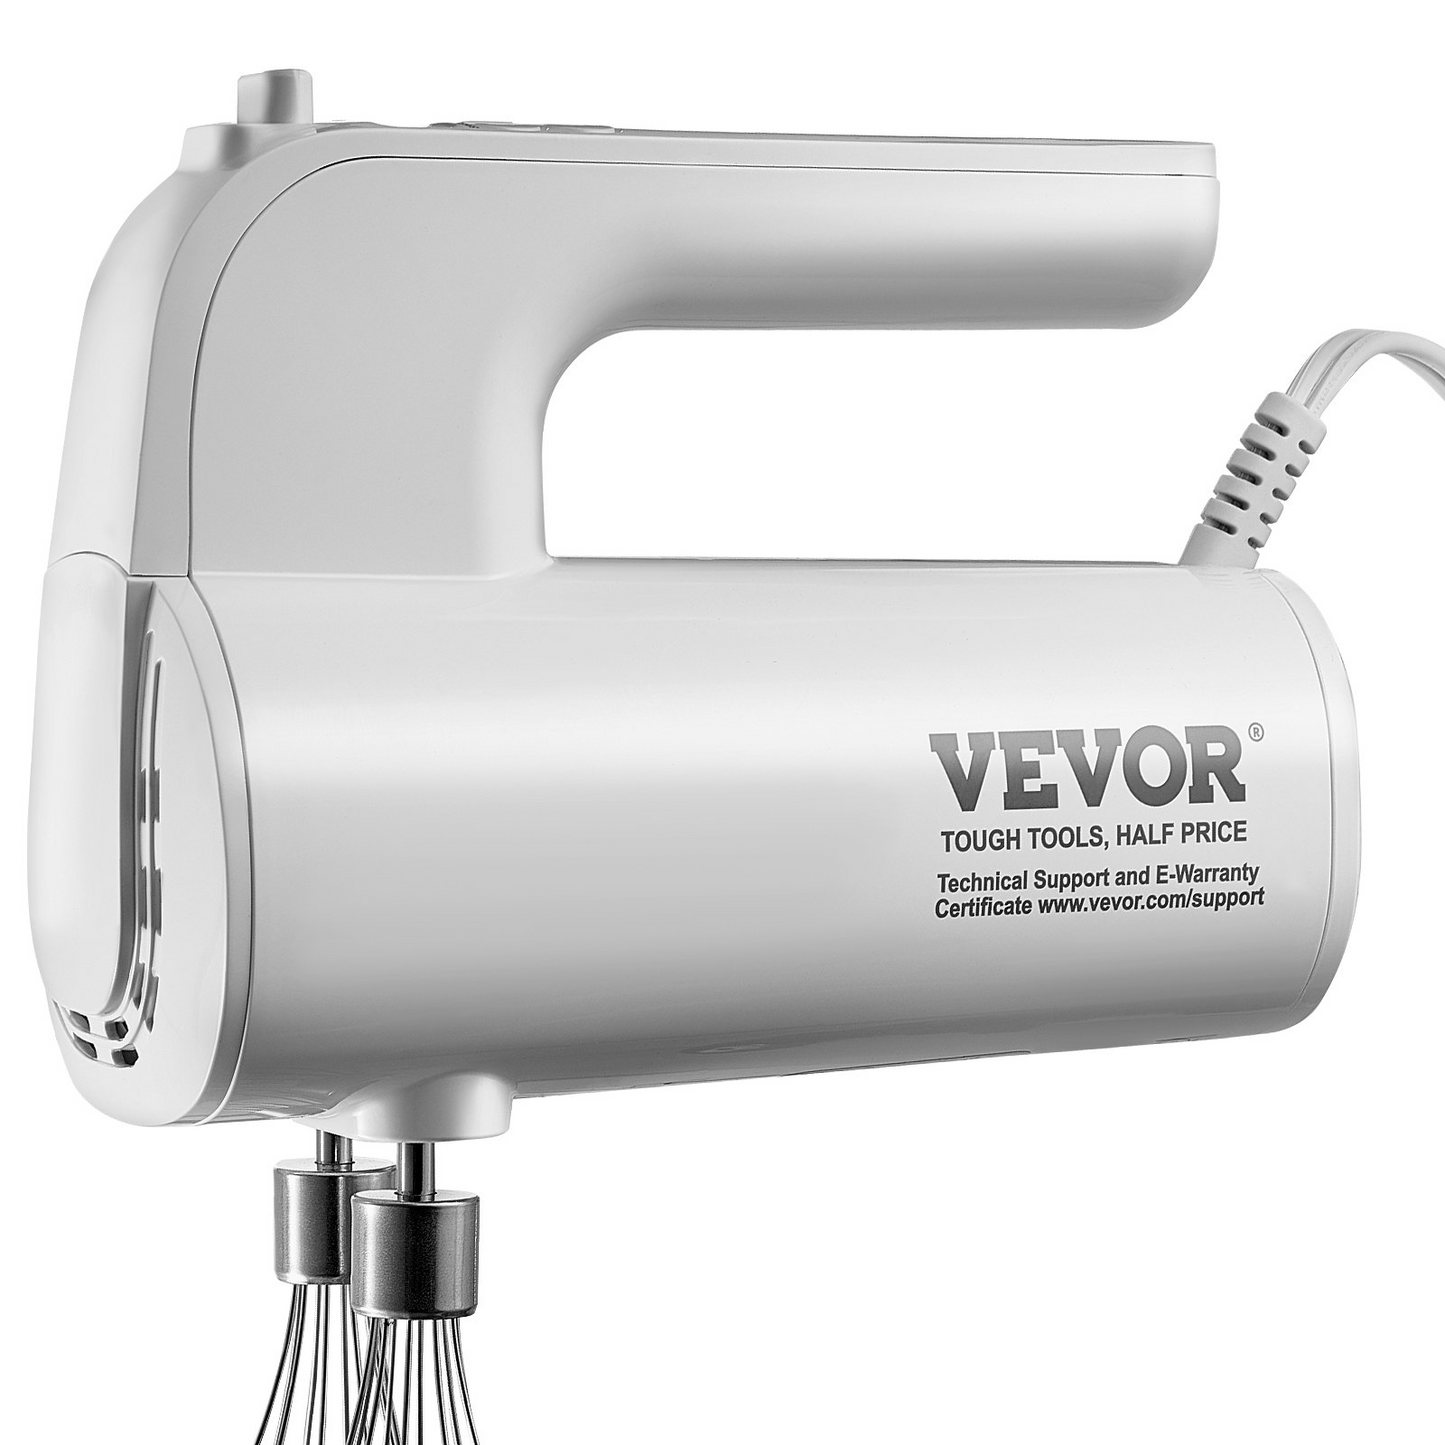 VEVOR Digital Electric Hand Mixer, 5-Speed, 200W Portable Electric Handheld Mixer, with Turbo Boost Beaters Dough Hooks Whisks Storage Bag, Baking Supplies for Whipping Mixing Egg Cookie Cake Cream